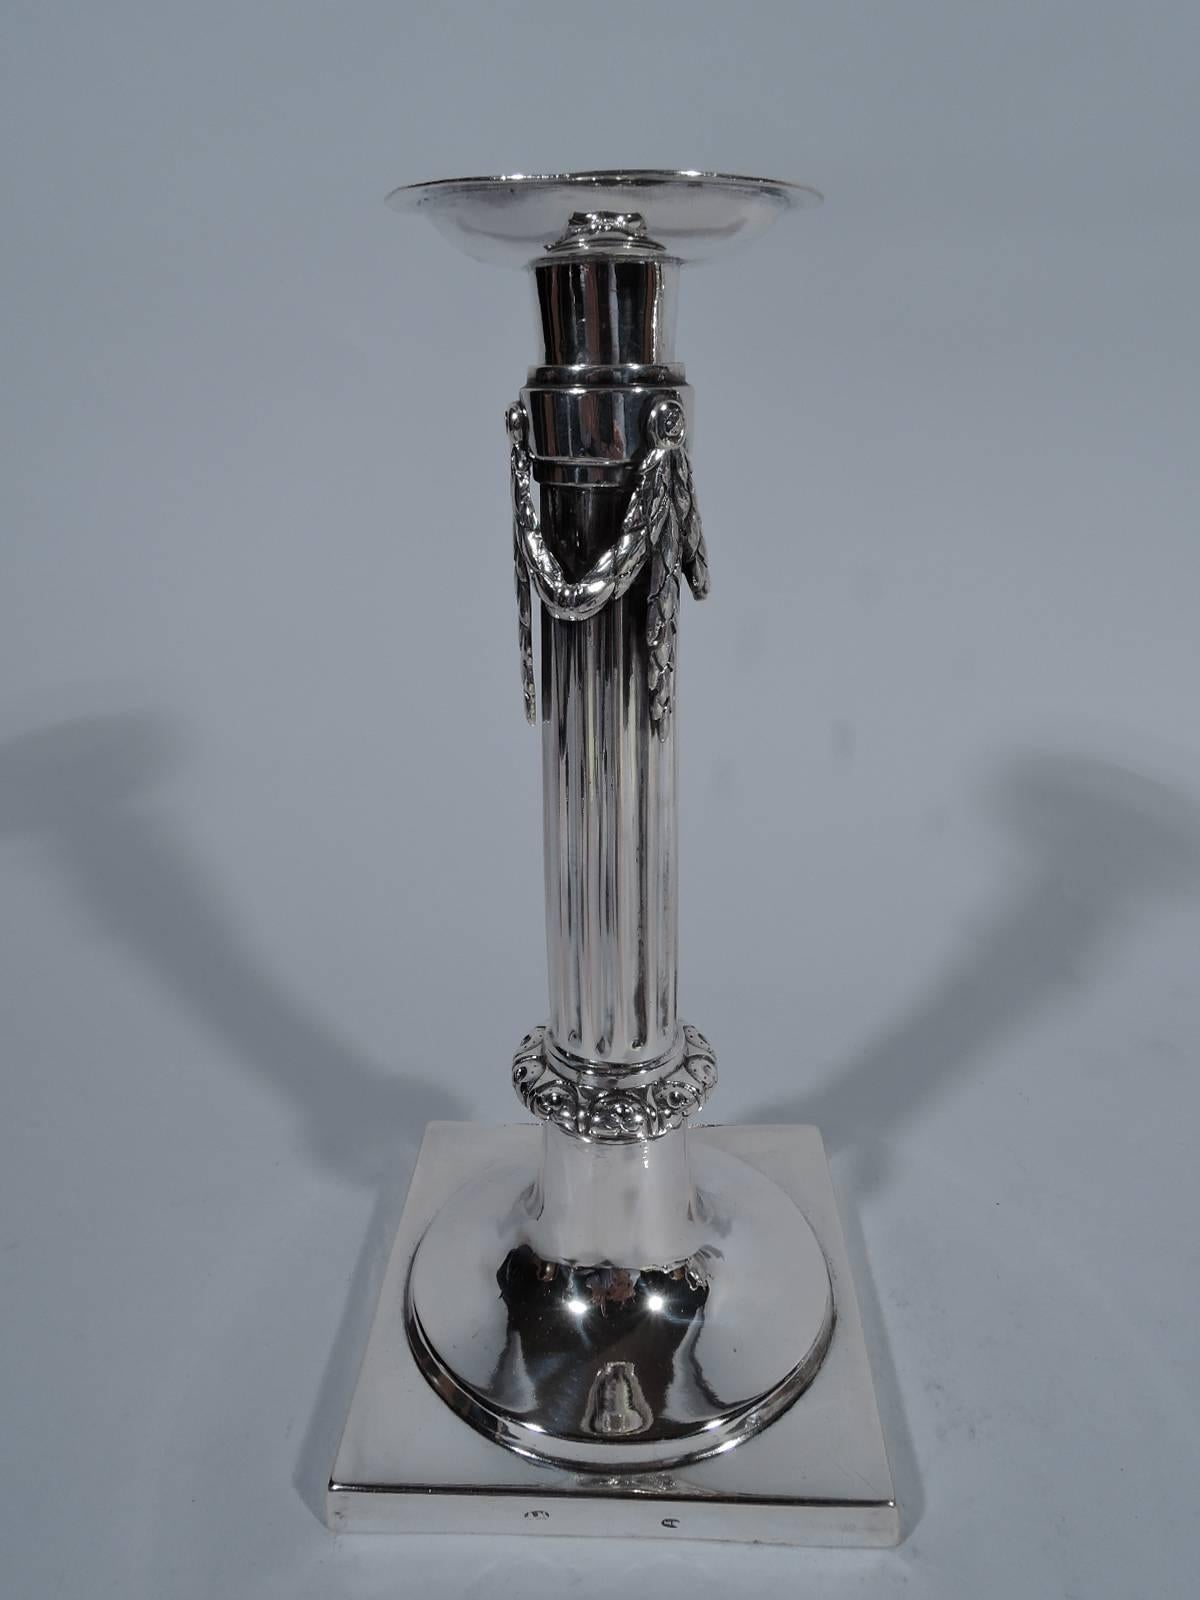 Pair of German Biedermeier silver candlesticks, circa 1840. Each: Fluted column mounted to square base. Leaf garland mounted to top. Tooled leaf-and-dart knop at column base. Detachable bobeches. Spare classicism. Hallmarked. Total weight: 16.2 troy